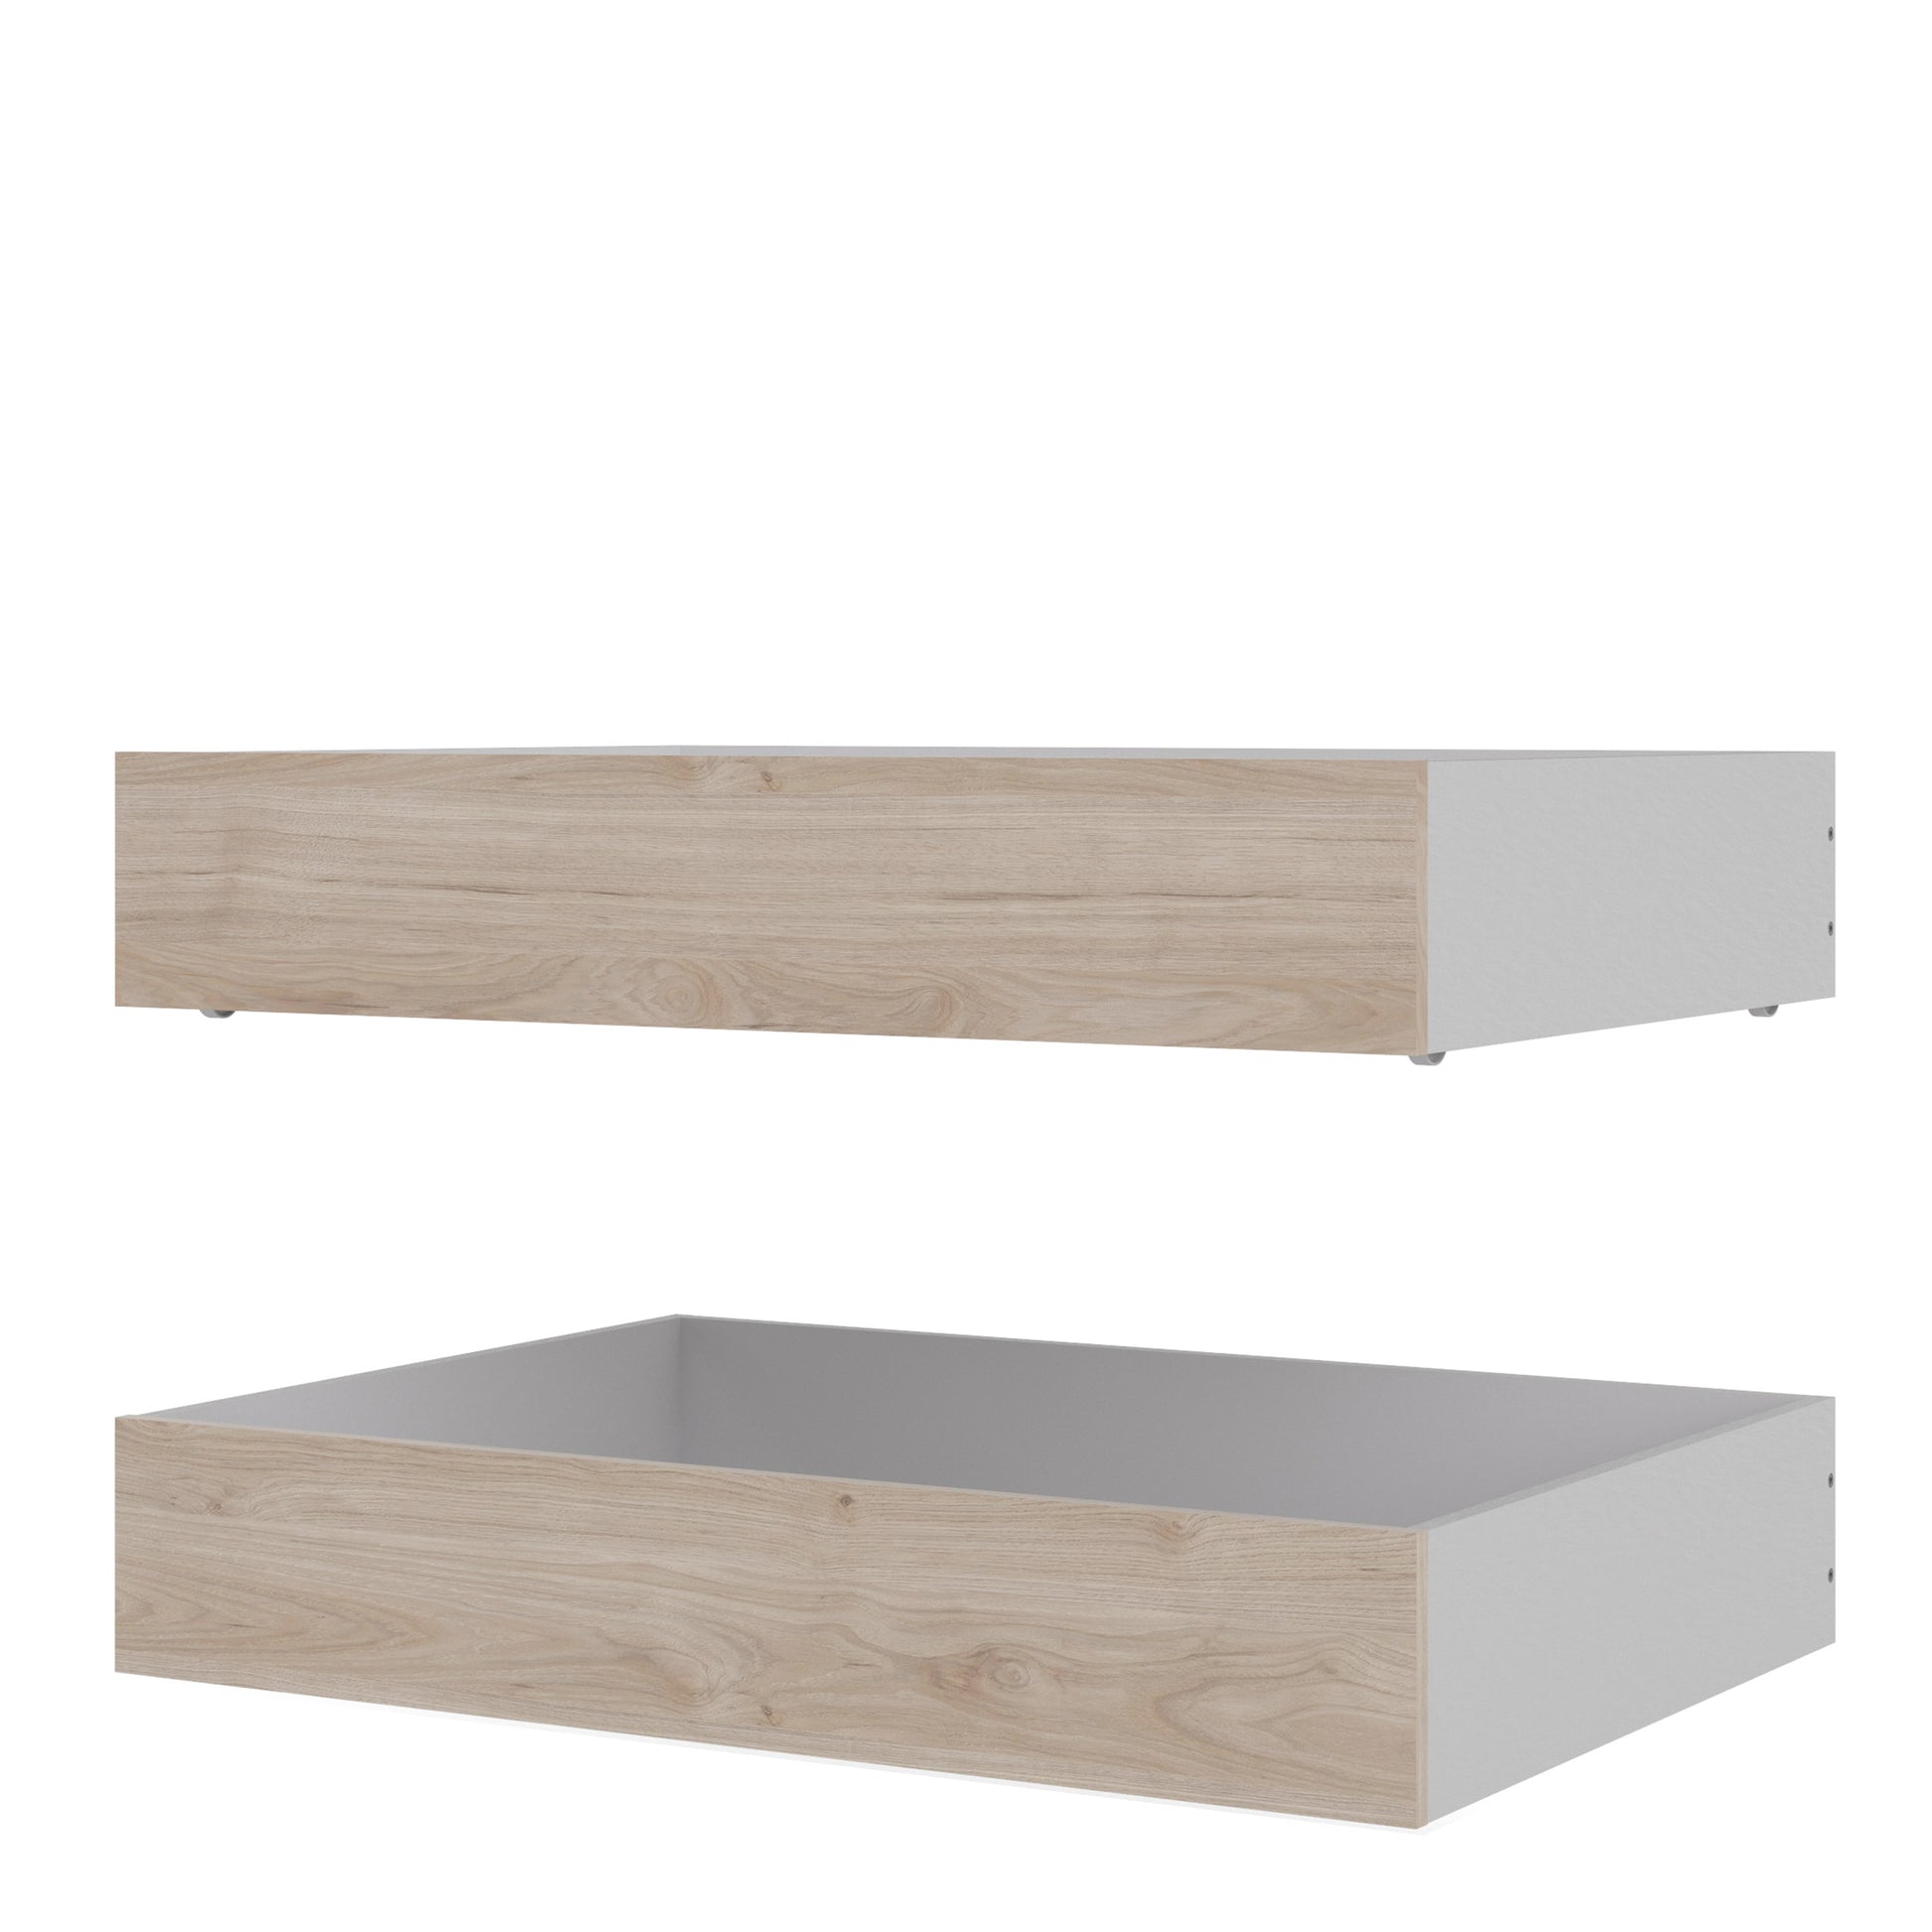 Naia  Set of 2 Underbed Drawers (for Single or Double beds) in Jackson Hickory Oak